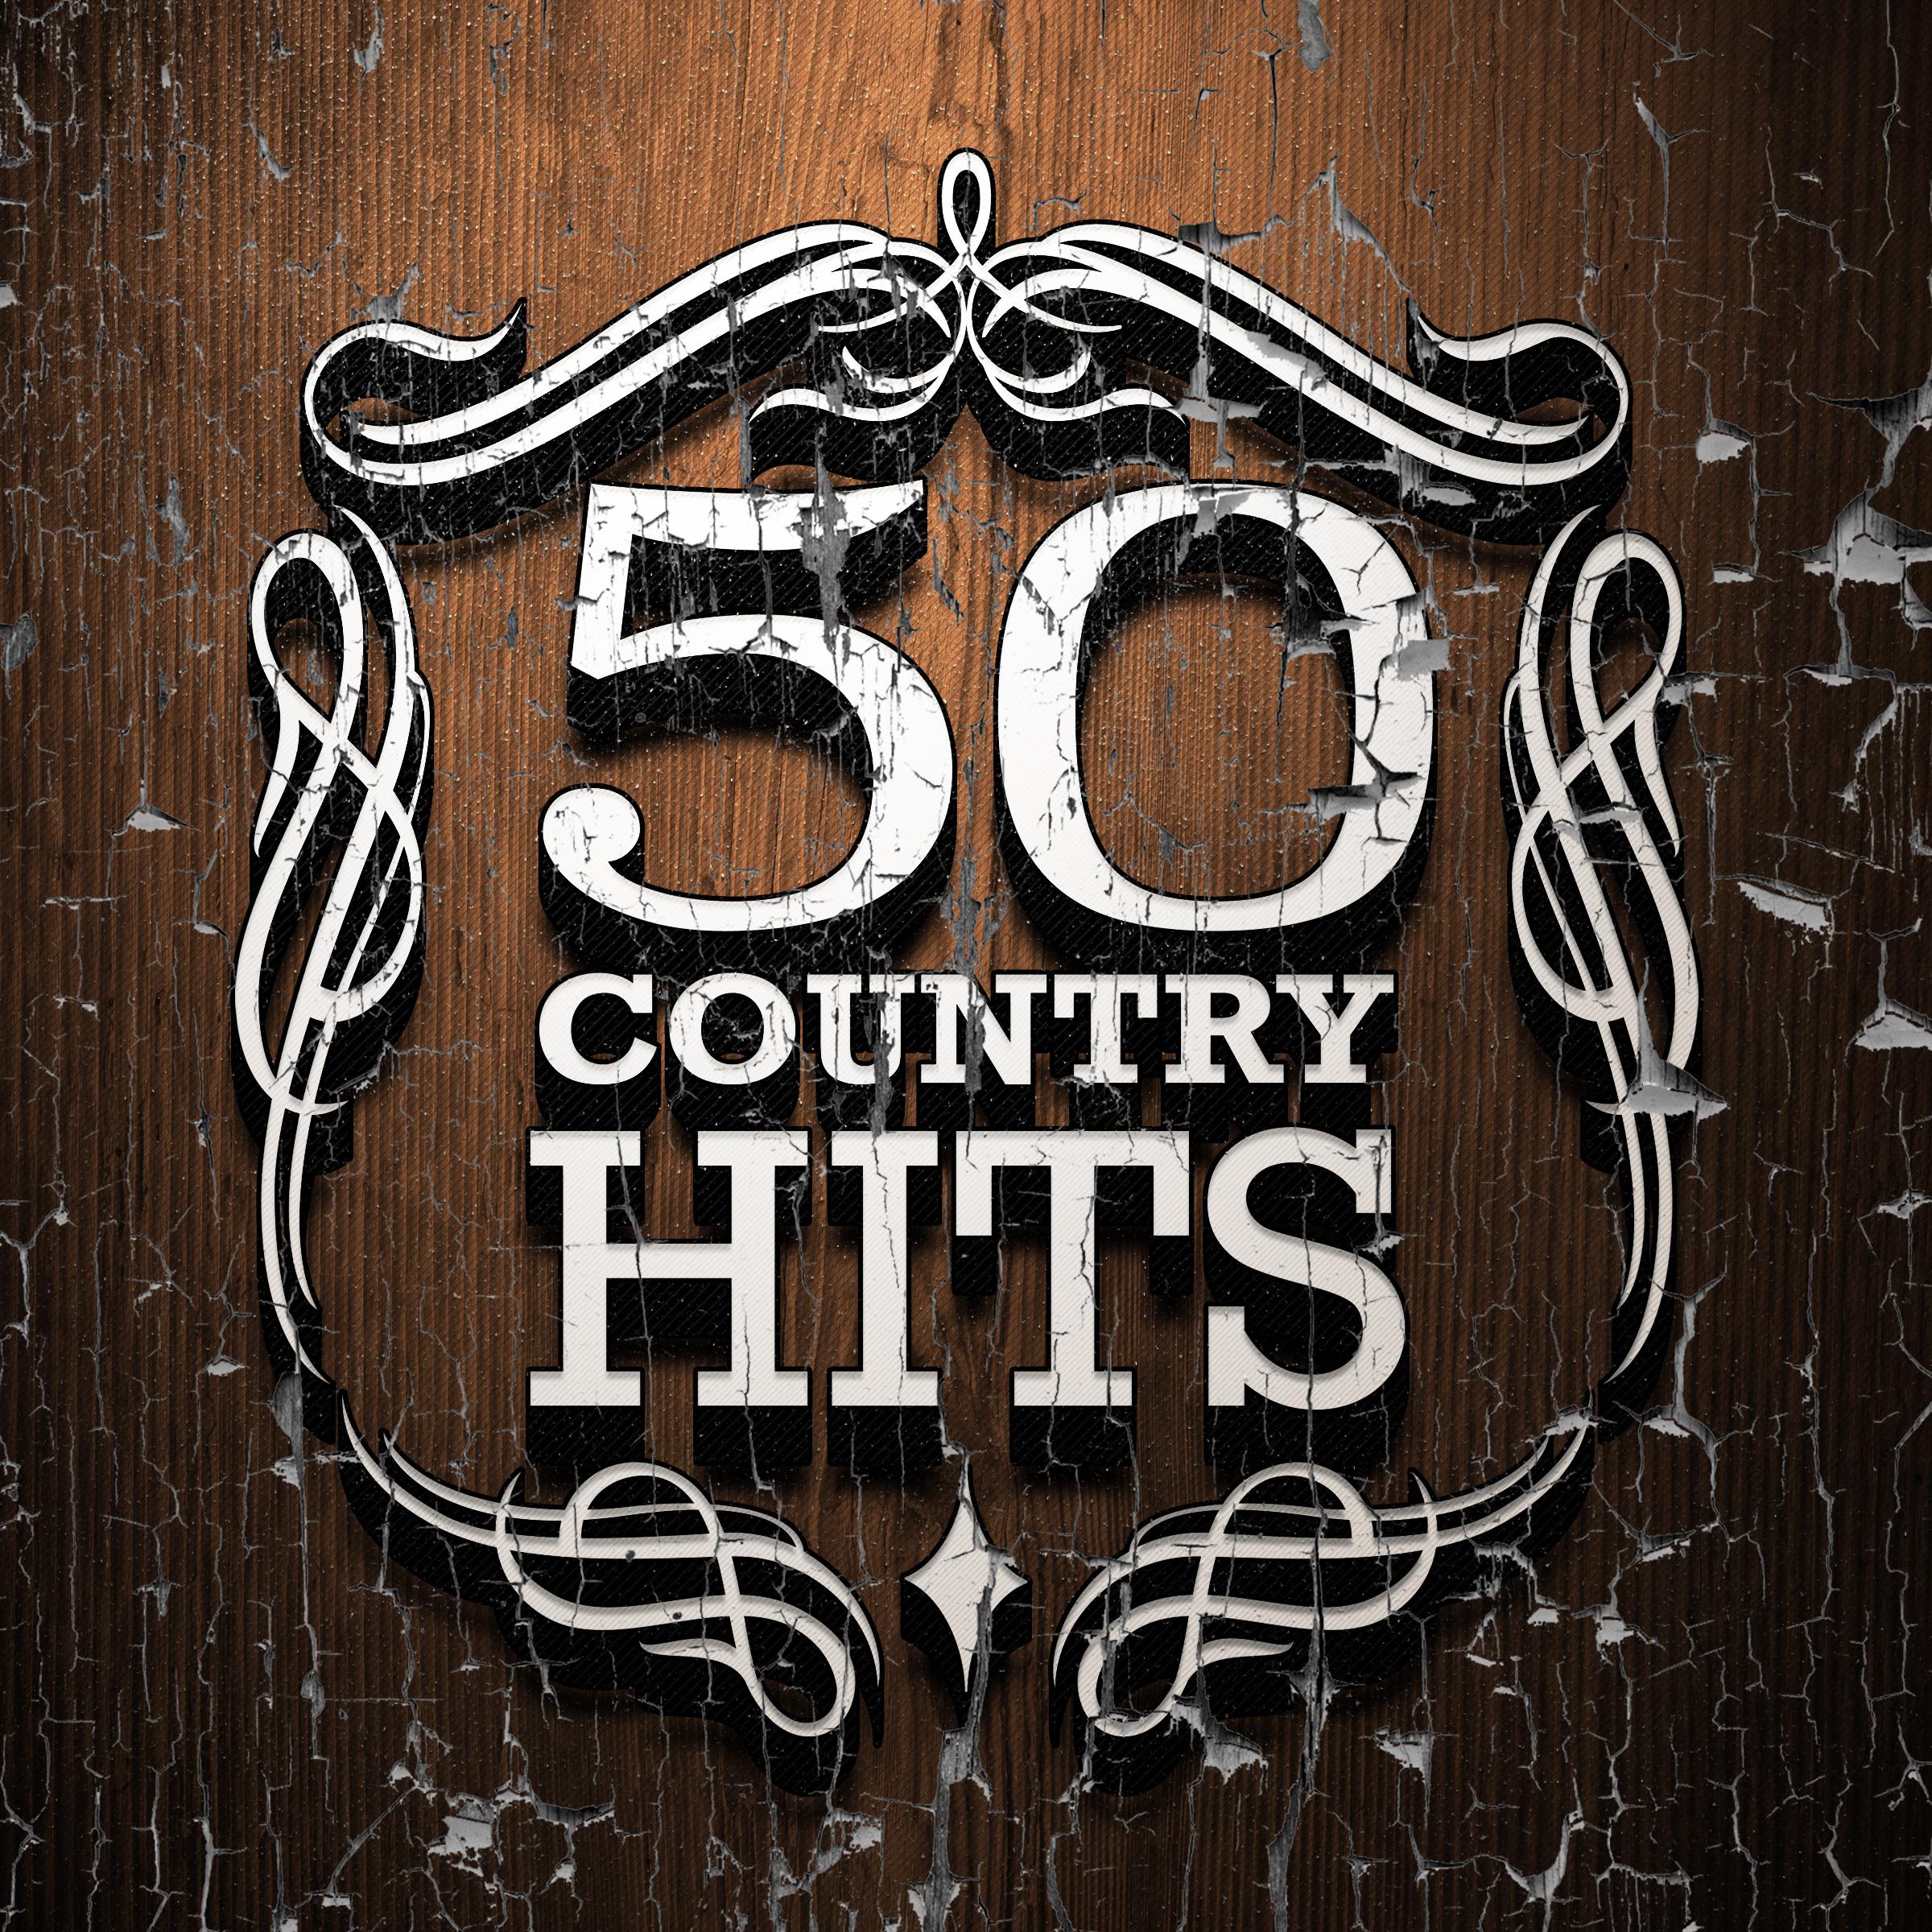 50 Country Hits